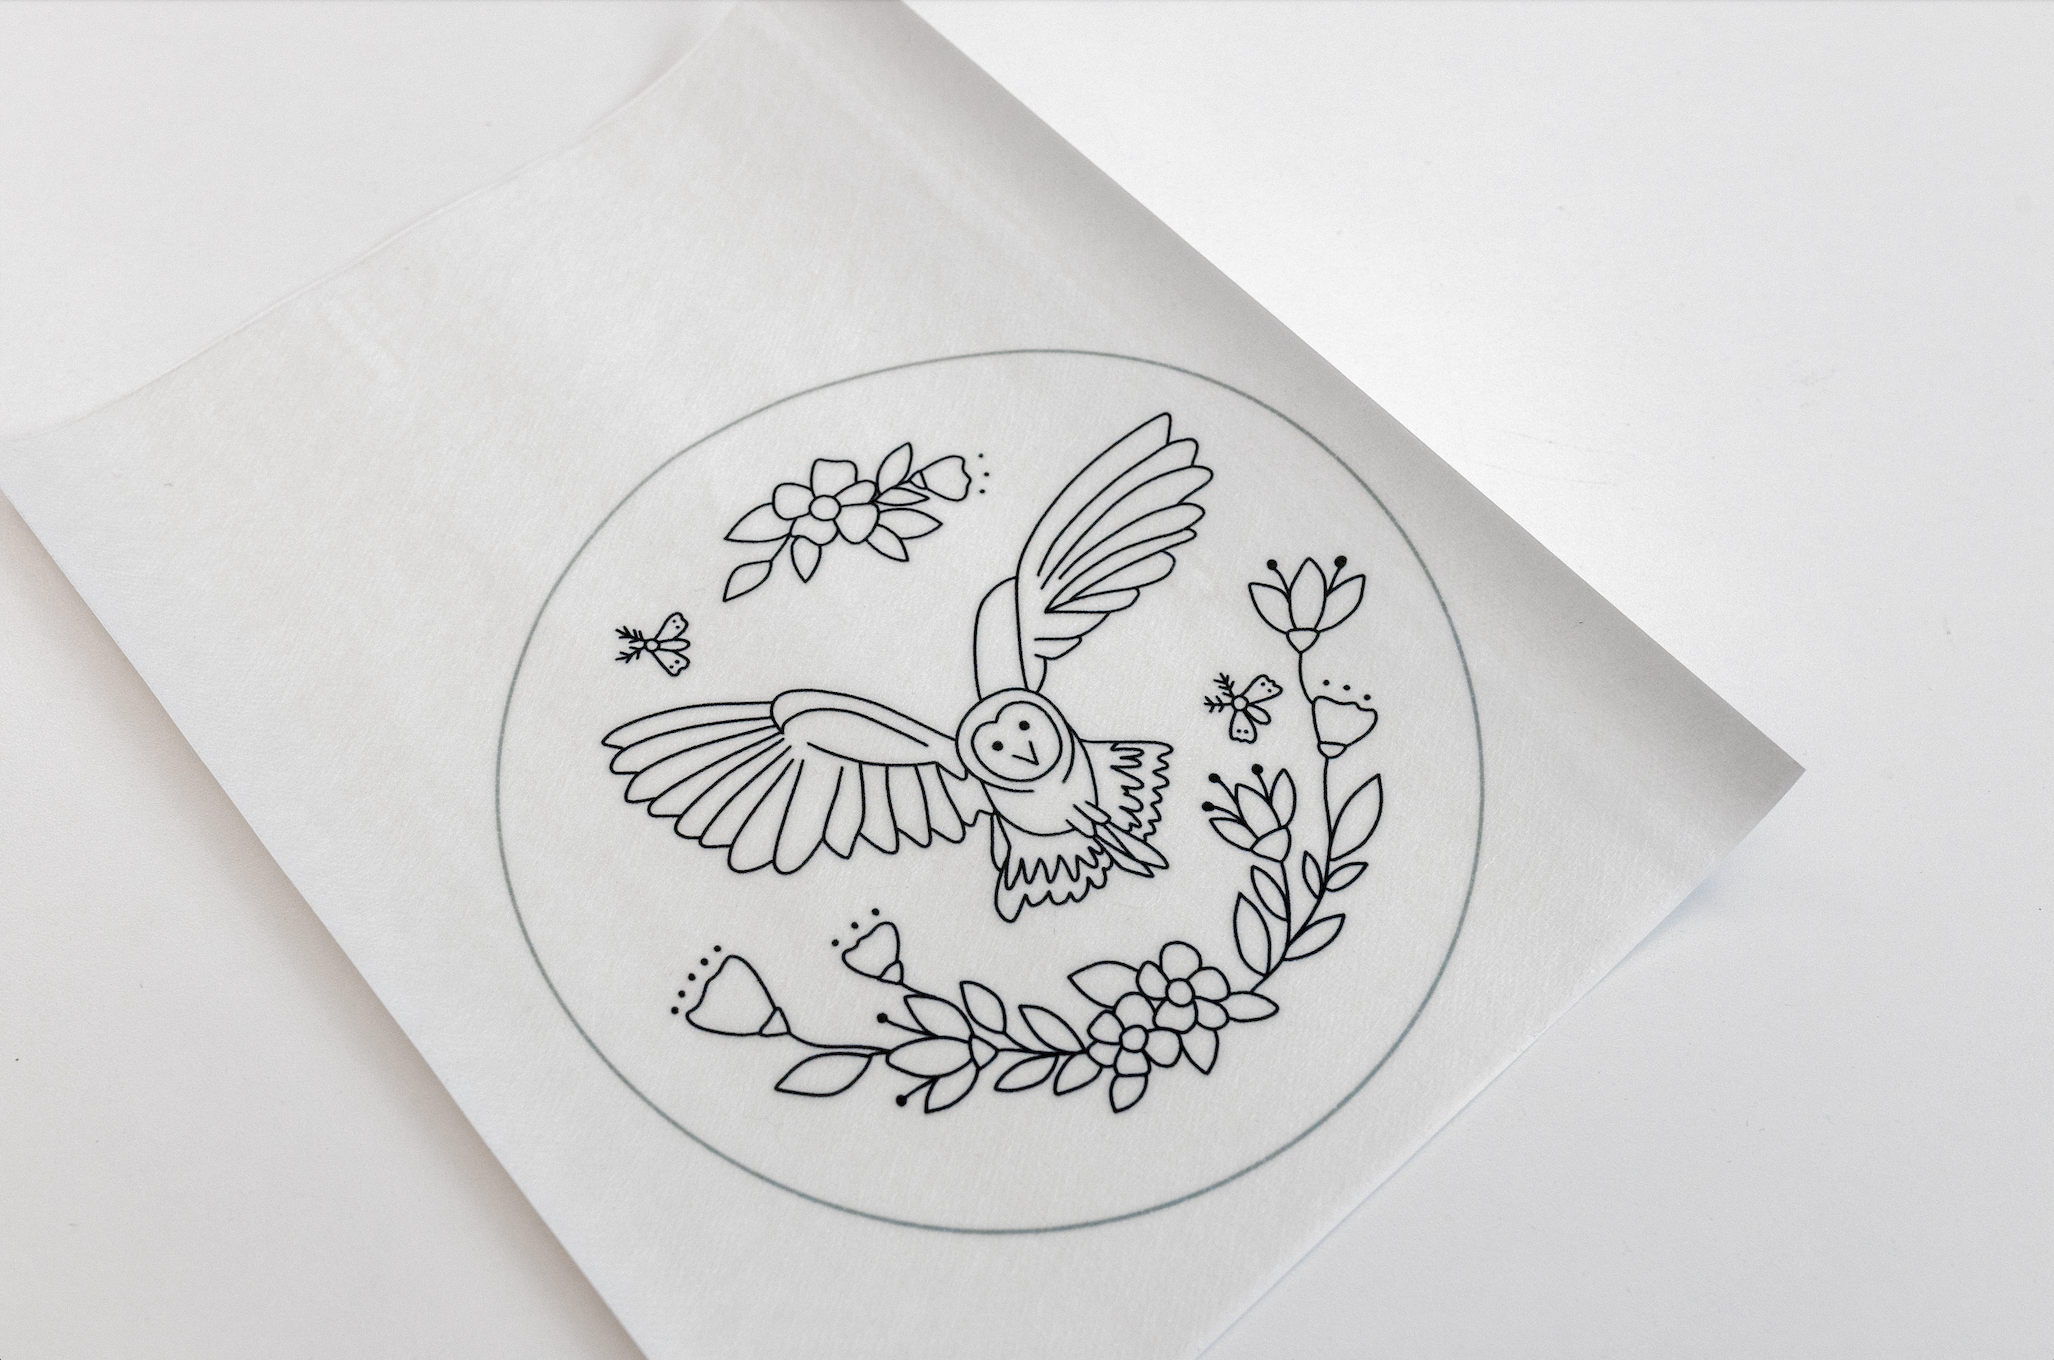 The Night Owl pattern is printed on a sheet of water-soluble stabiliser.